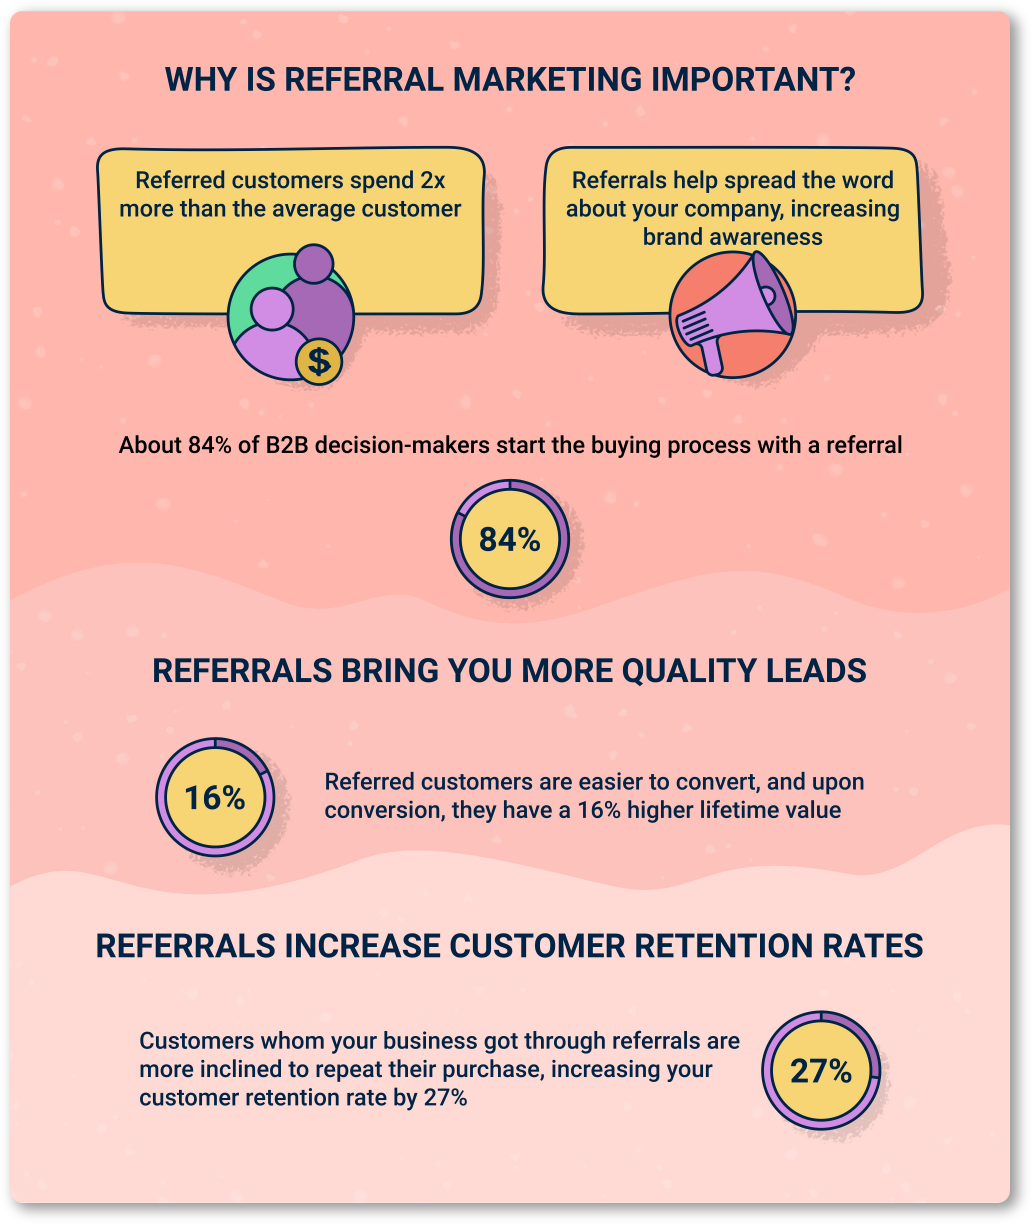 Why is referral marketing important